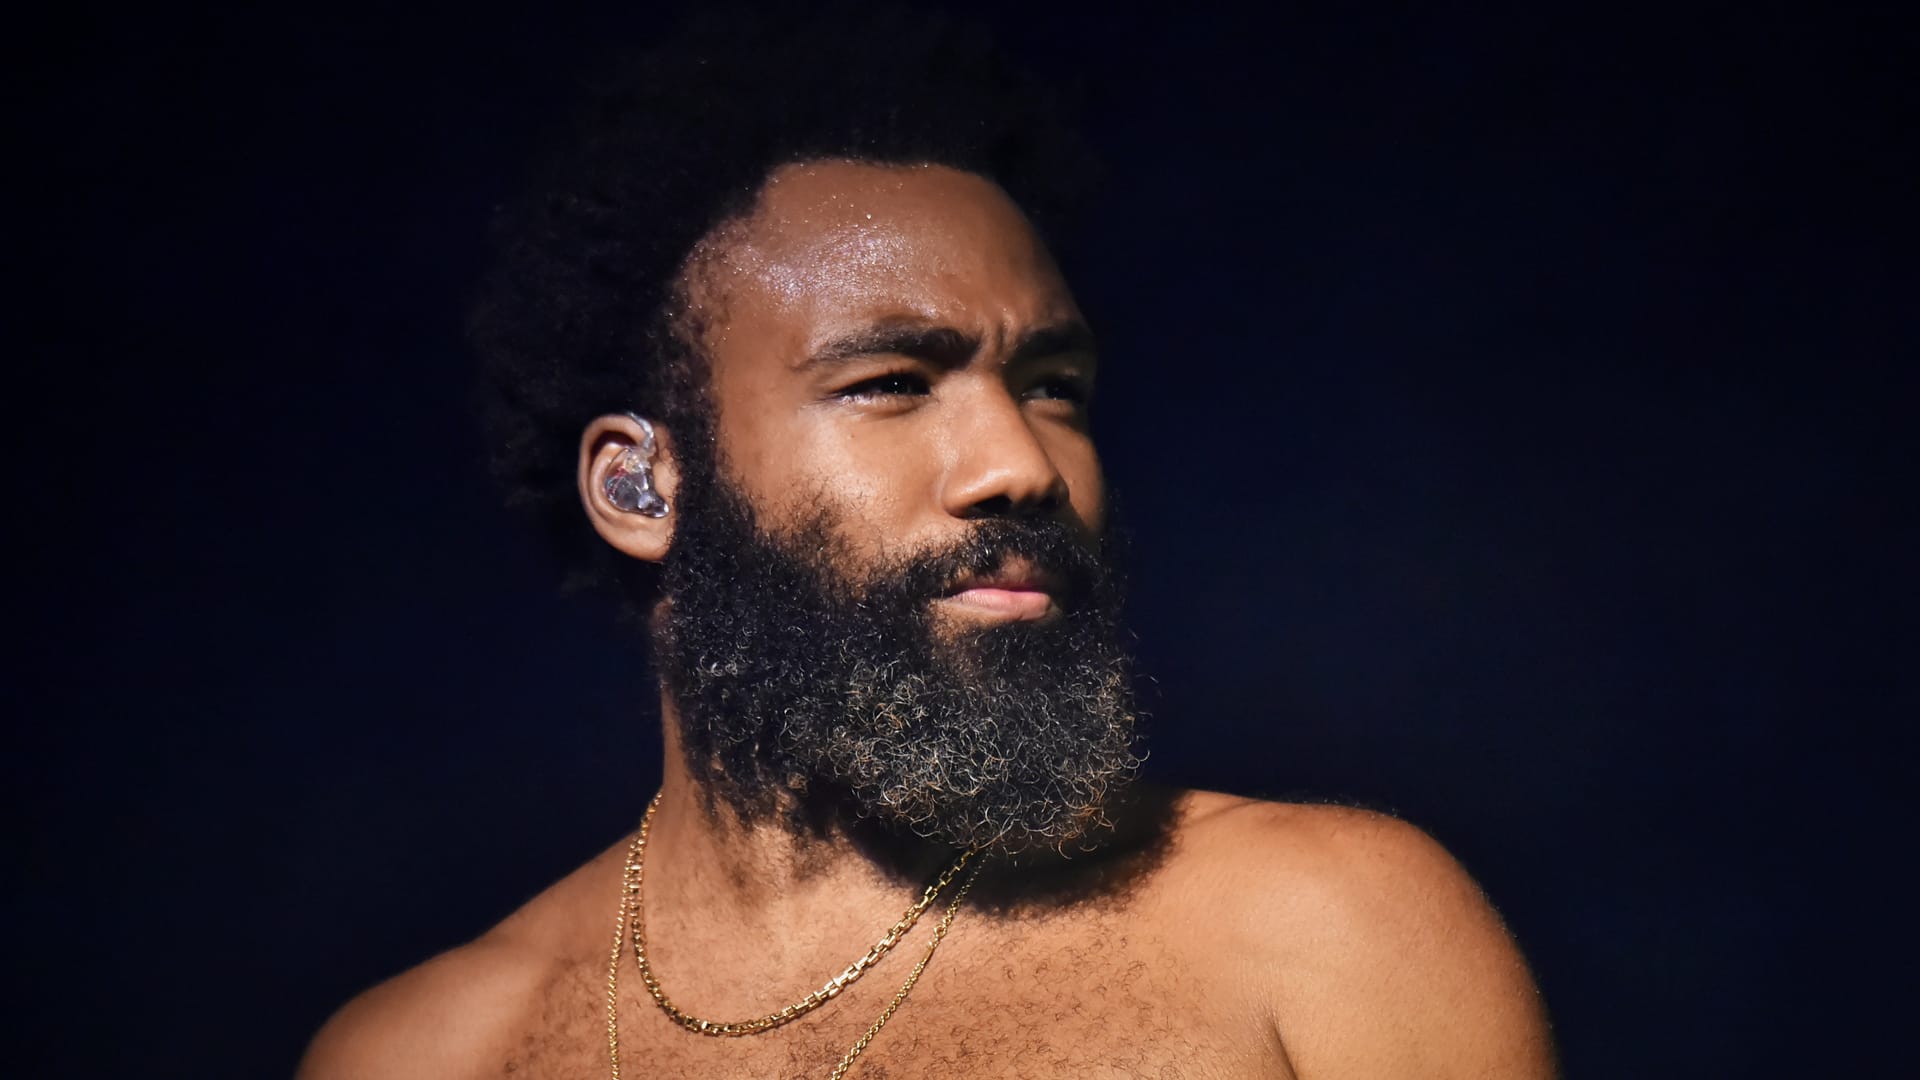 Donald Glover Drops Surprise New Music with Ariana Grande, SZA & 21 Savage  - 99.7 NOW